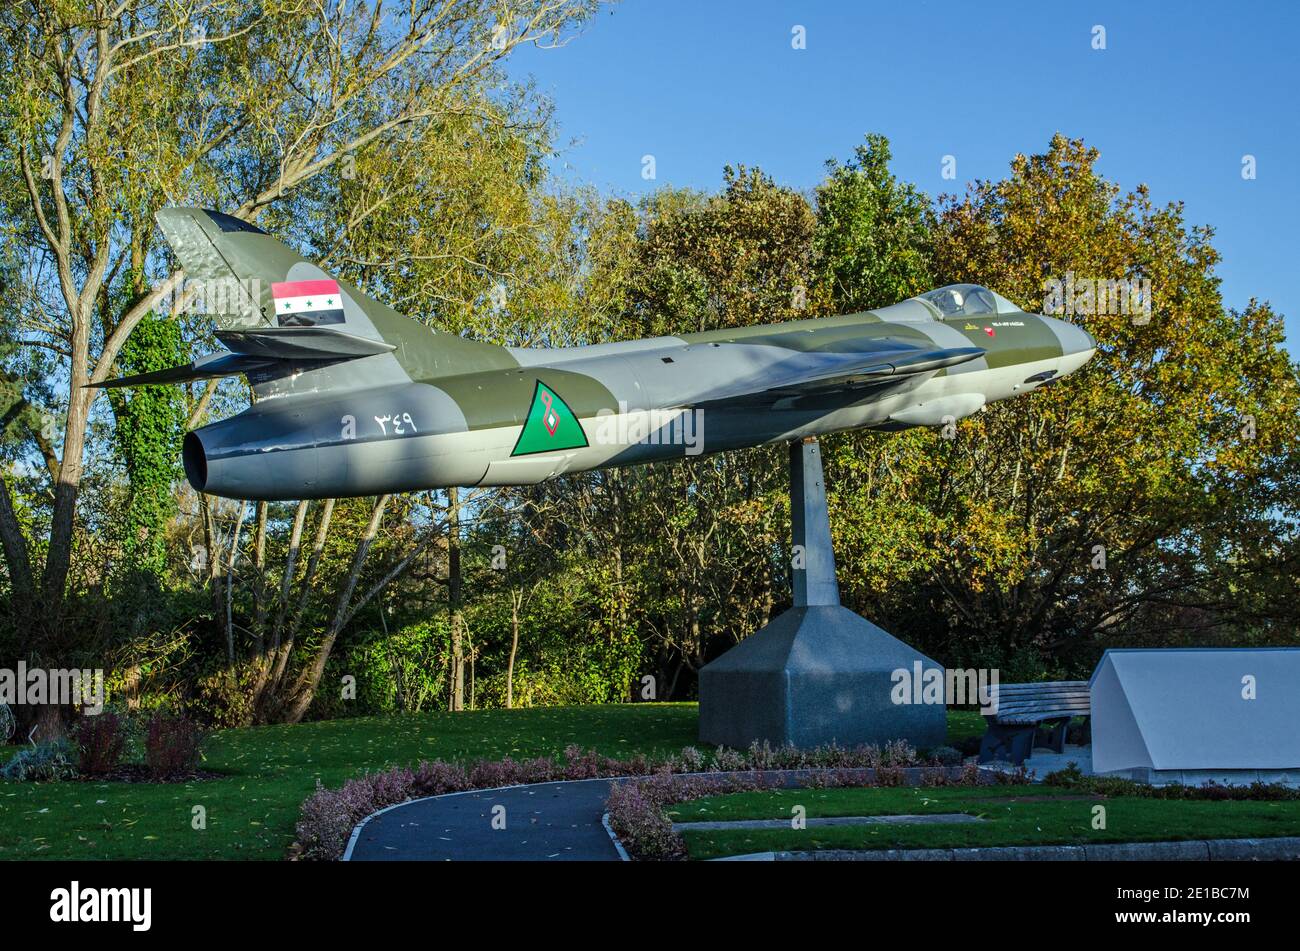 The restored Hawker Hunter fighter jet on display at a road junction in Basingstoke, Hampshire.  The former air force plane stands near the offices of Stock Photo